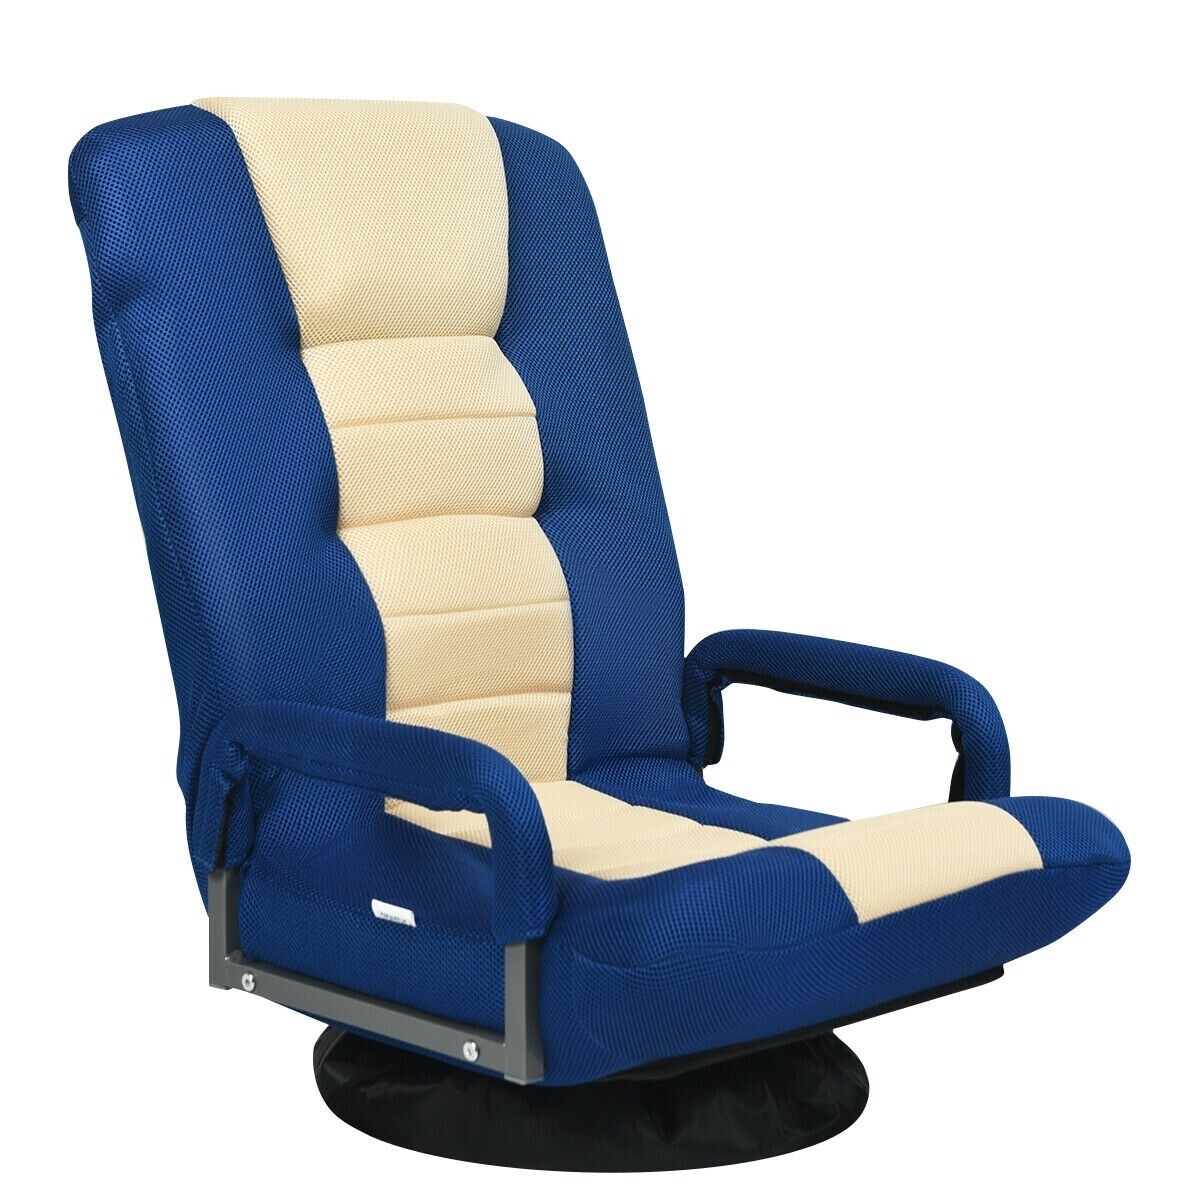 360-Degree Swivel Gaming Floor Chair with Foldable Adjustable Backrest-Blue - Color: Blue